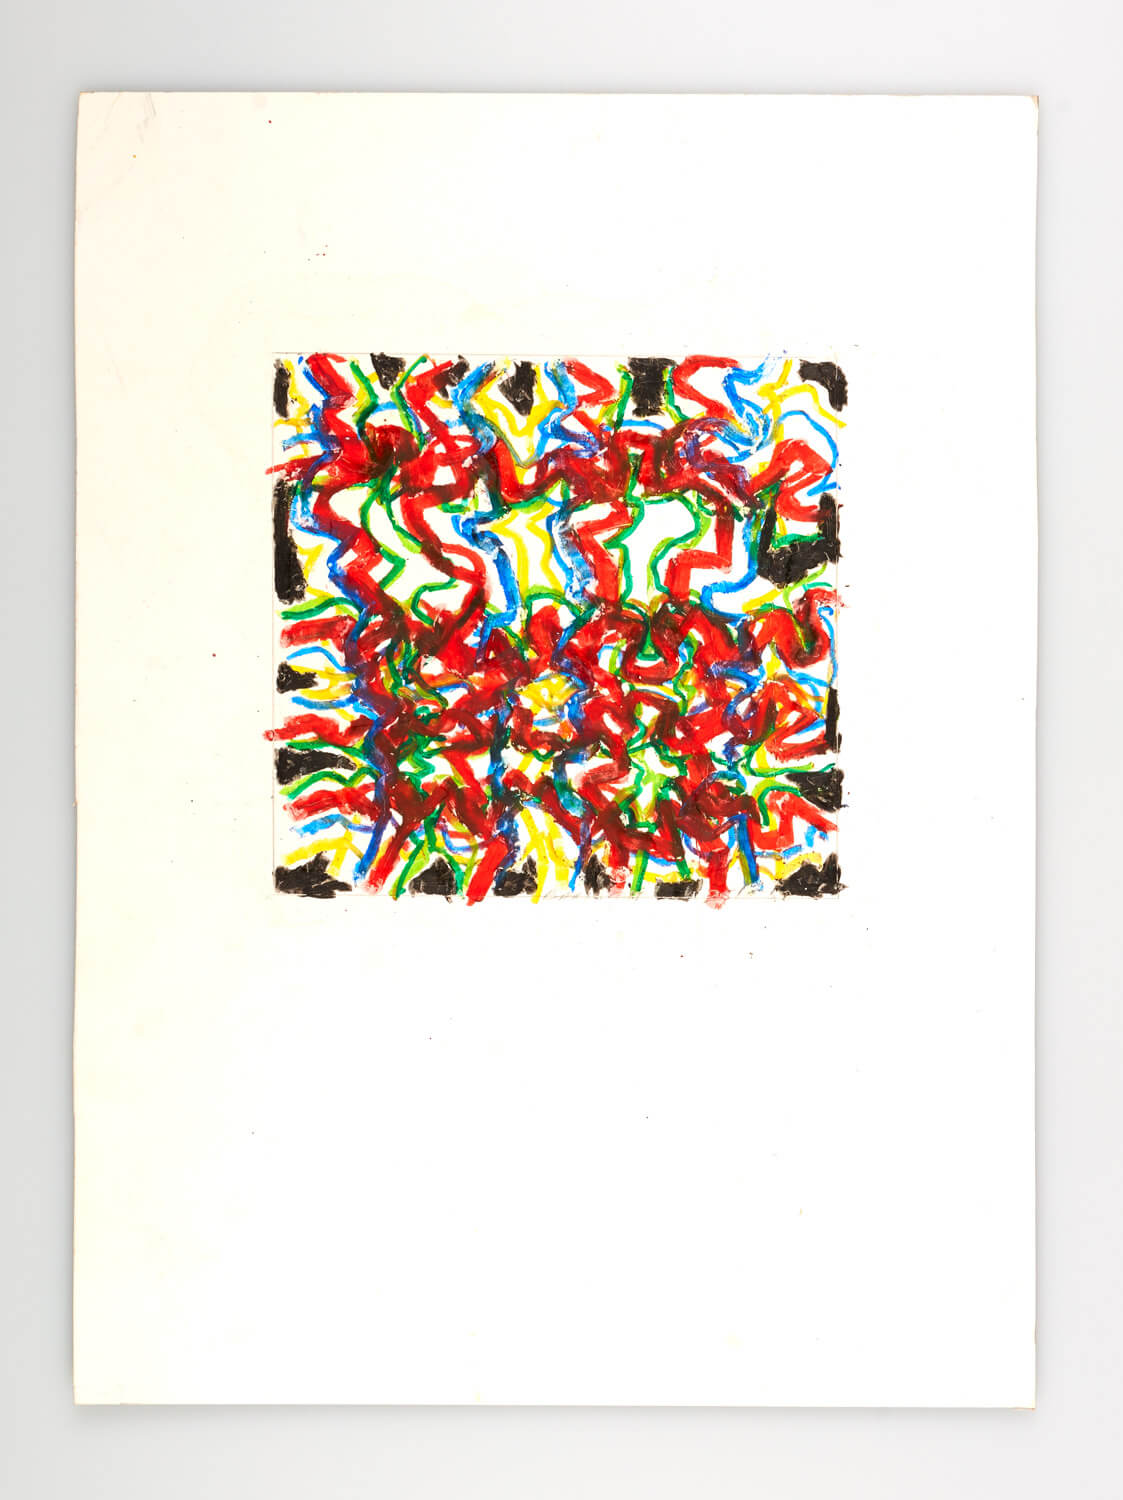 JB126 - Abstract, Black, Blue, Red, green - 2000 - 21 x 22 cm - Conte on card